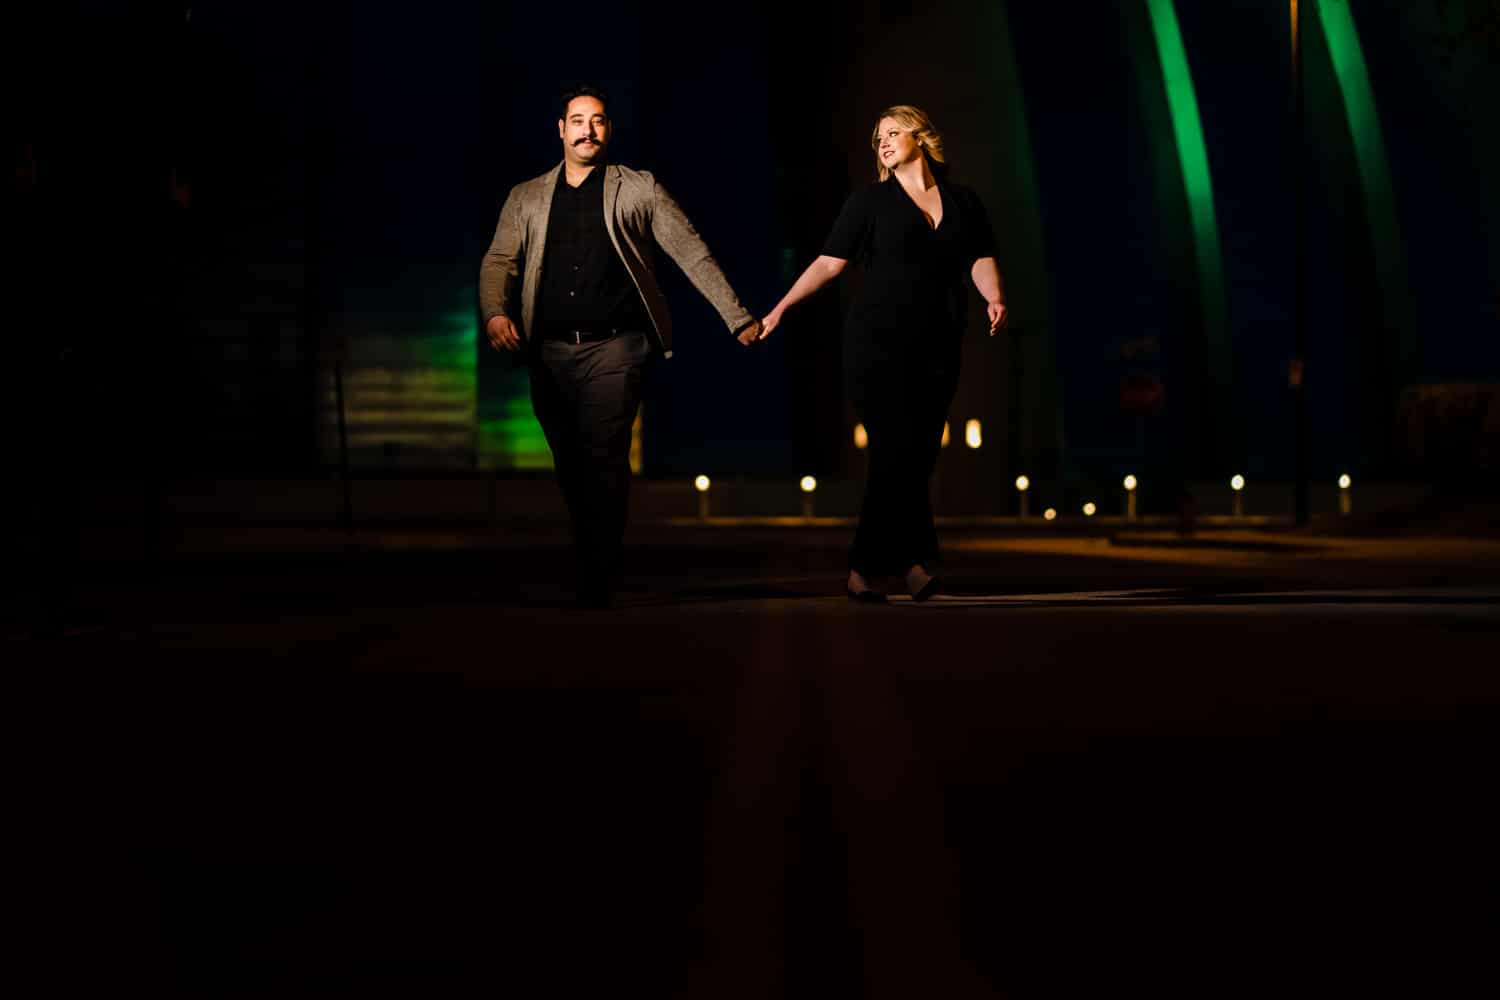 A colorful, candid portrait of an engaged couple holding hands as they walk down the center of a city street at night, the Kauffman Center for the Performing Arts visible behind them during their nighttime downtown KC engagement session. 